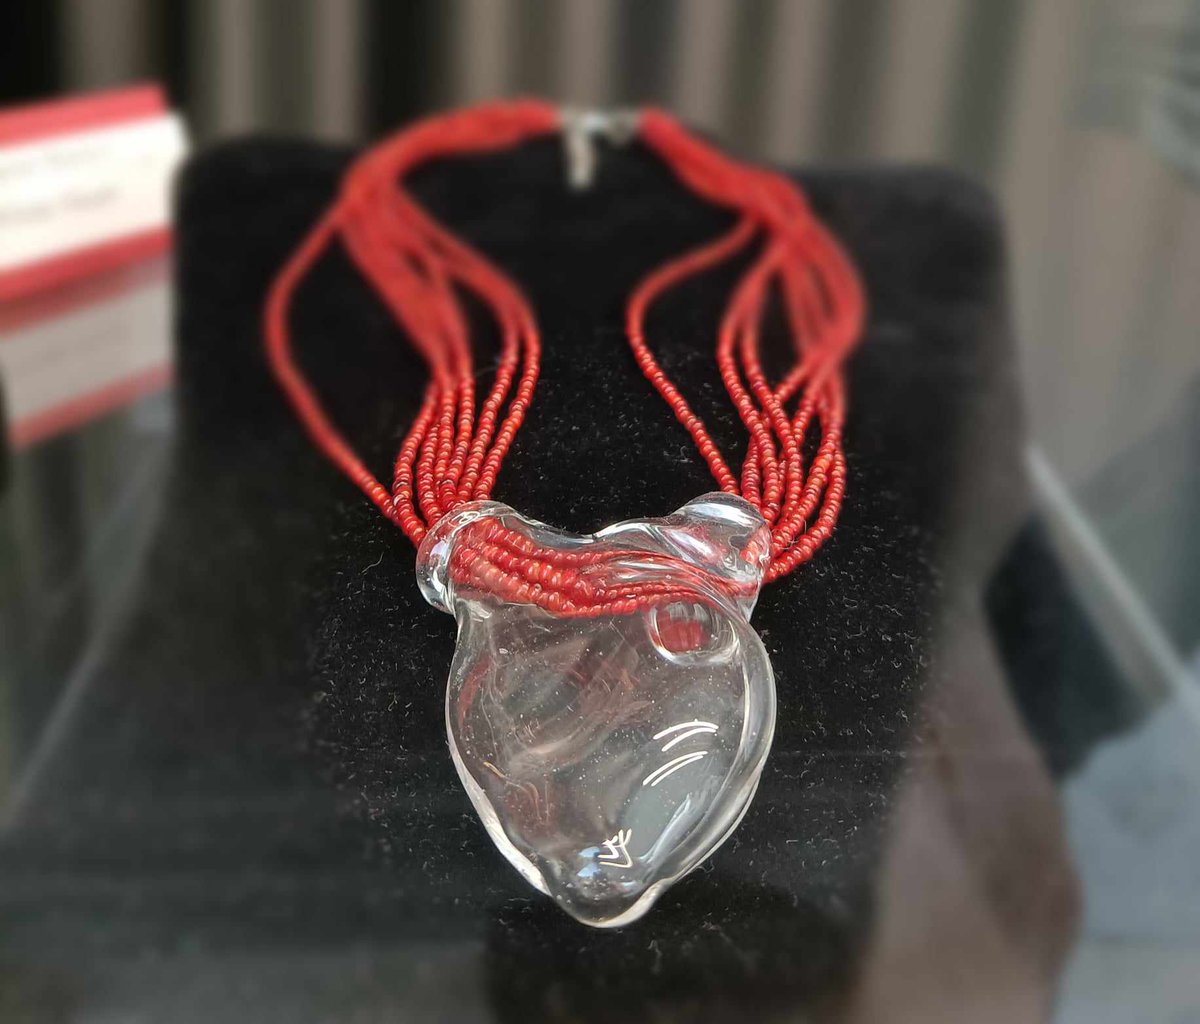 'Cuore Bianco' (White Herat) another glass blown masterpiece by @alessia_fuga technically a bead.
From the ABC A Bead Change collection, presented during @veniceglassweek   2023.

Available at @bottegacini .

marisaconvento.it

#marisaconvento #alessiafuga #madeinvenice